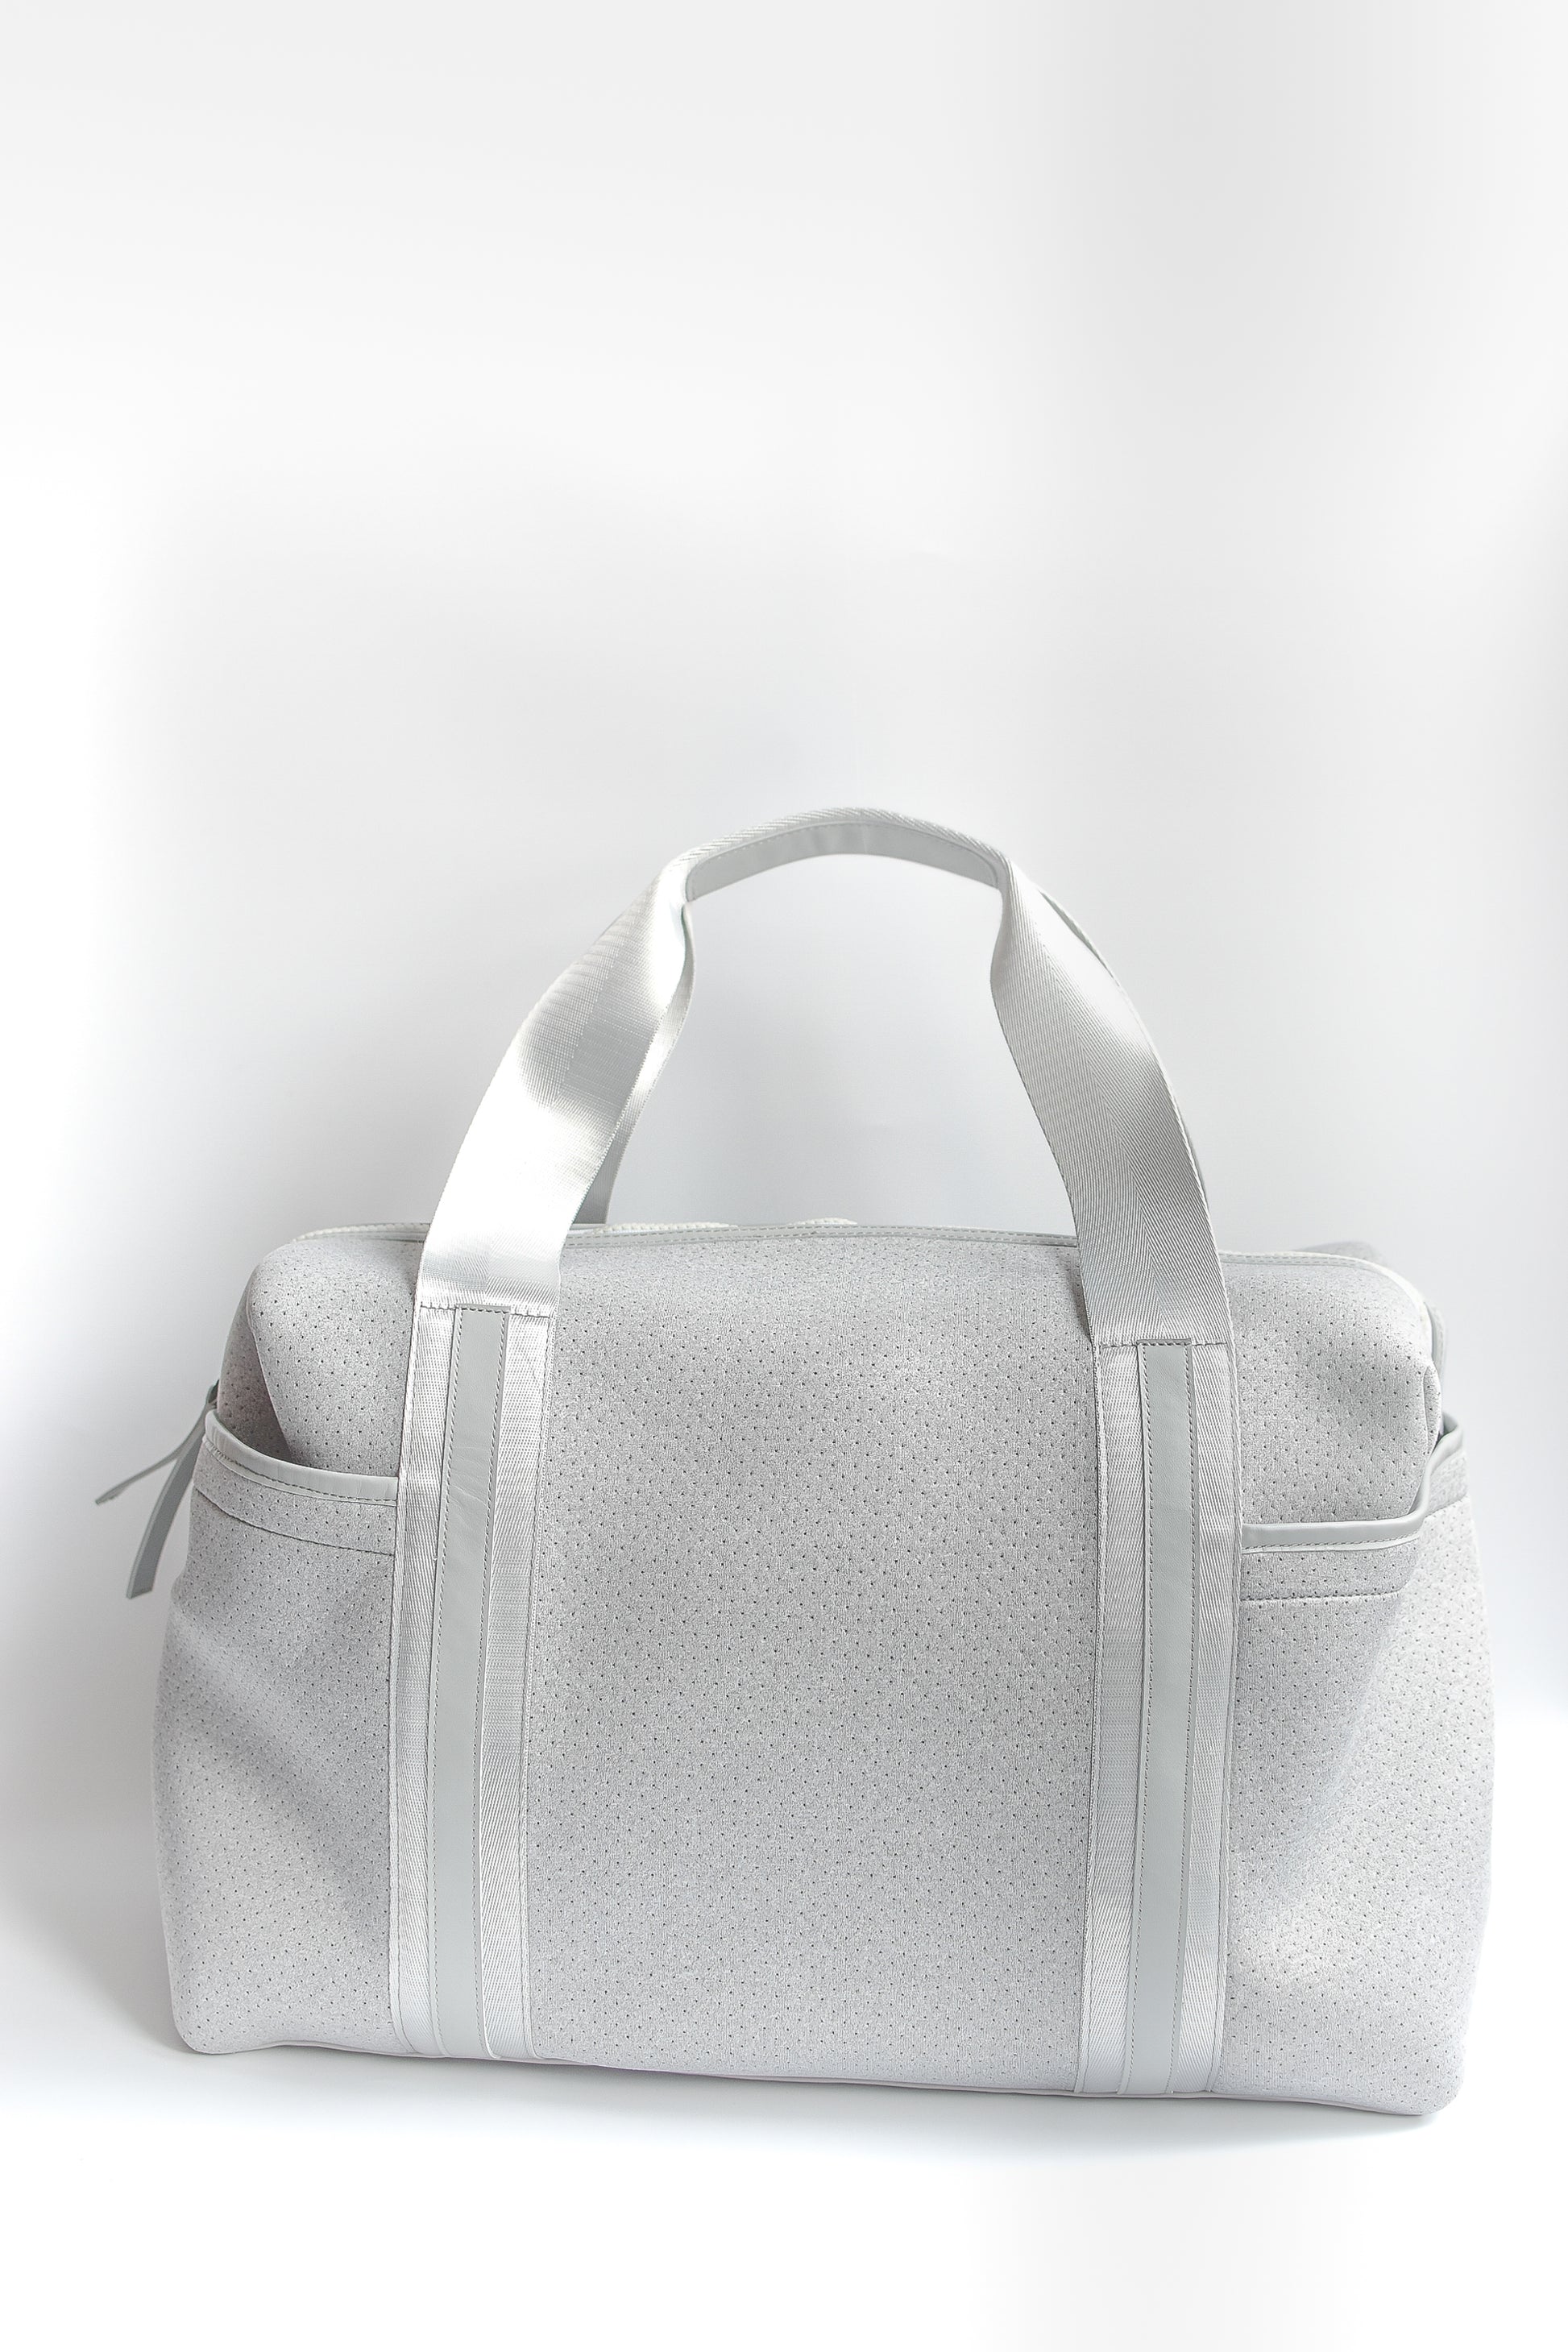 Callahan light gray perforated neoprene duffel bag with grey straps and leather details. 